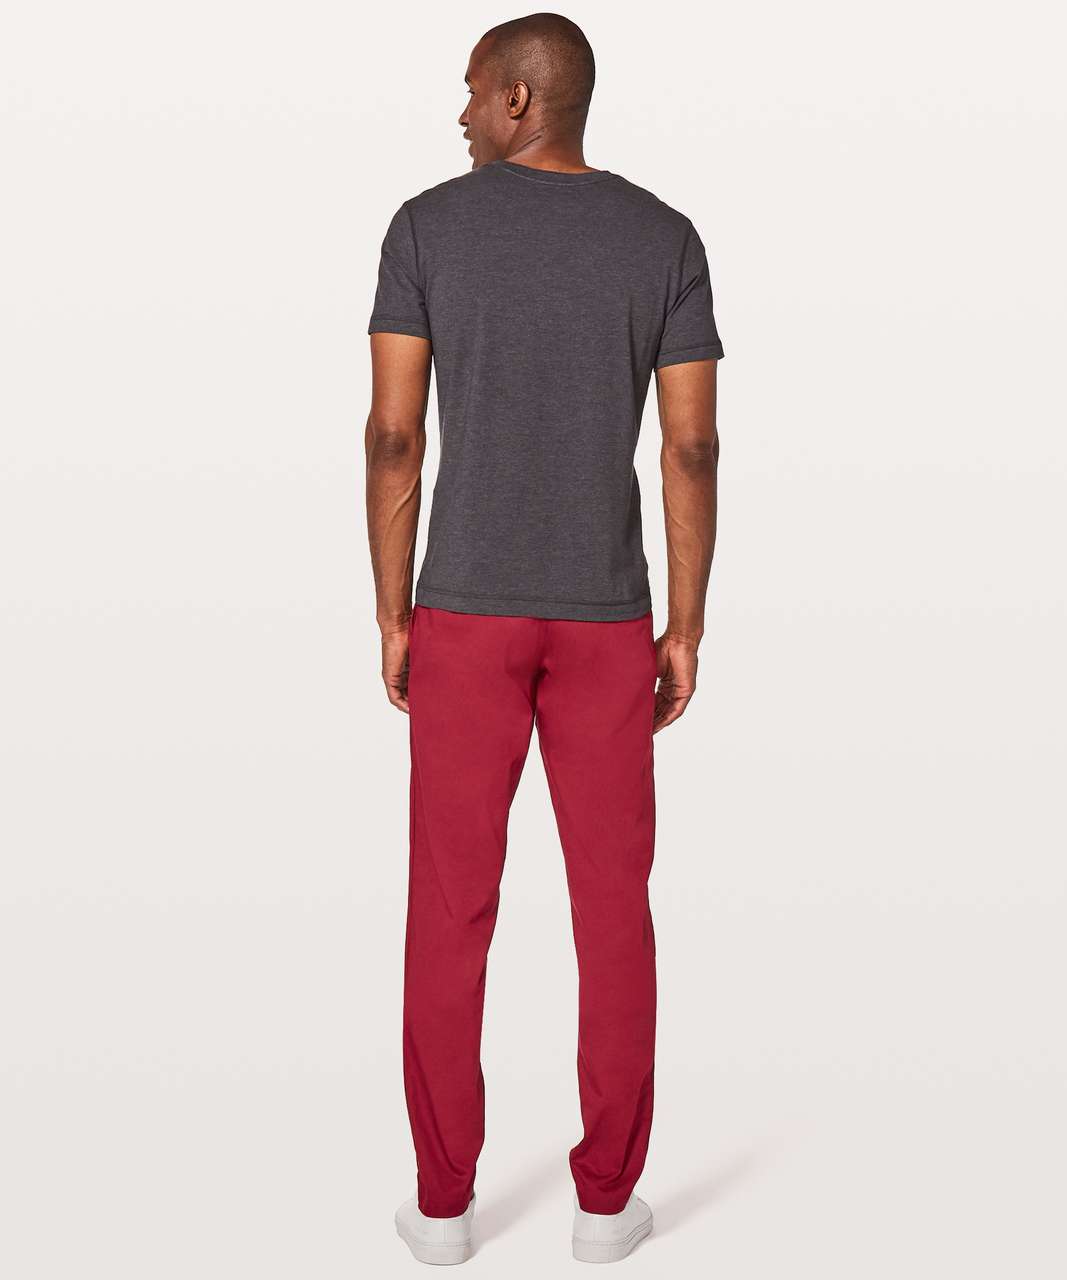 Costco] Kirkland Signature Men's Performance Pant (like Lululemon ABCs for  1/5th the cost) - Only $26.99 - RedFlagDeals.com Forums